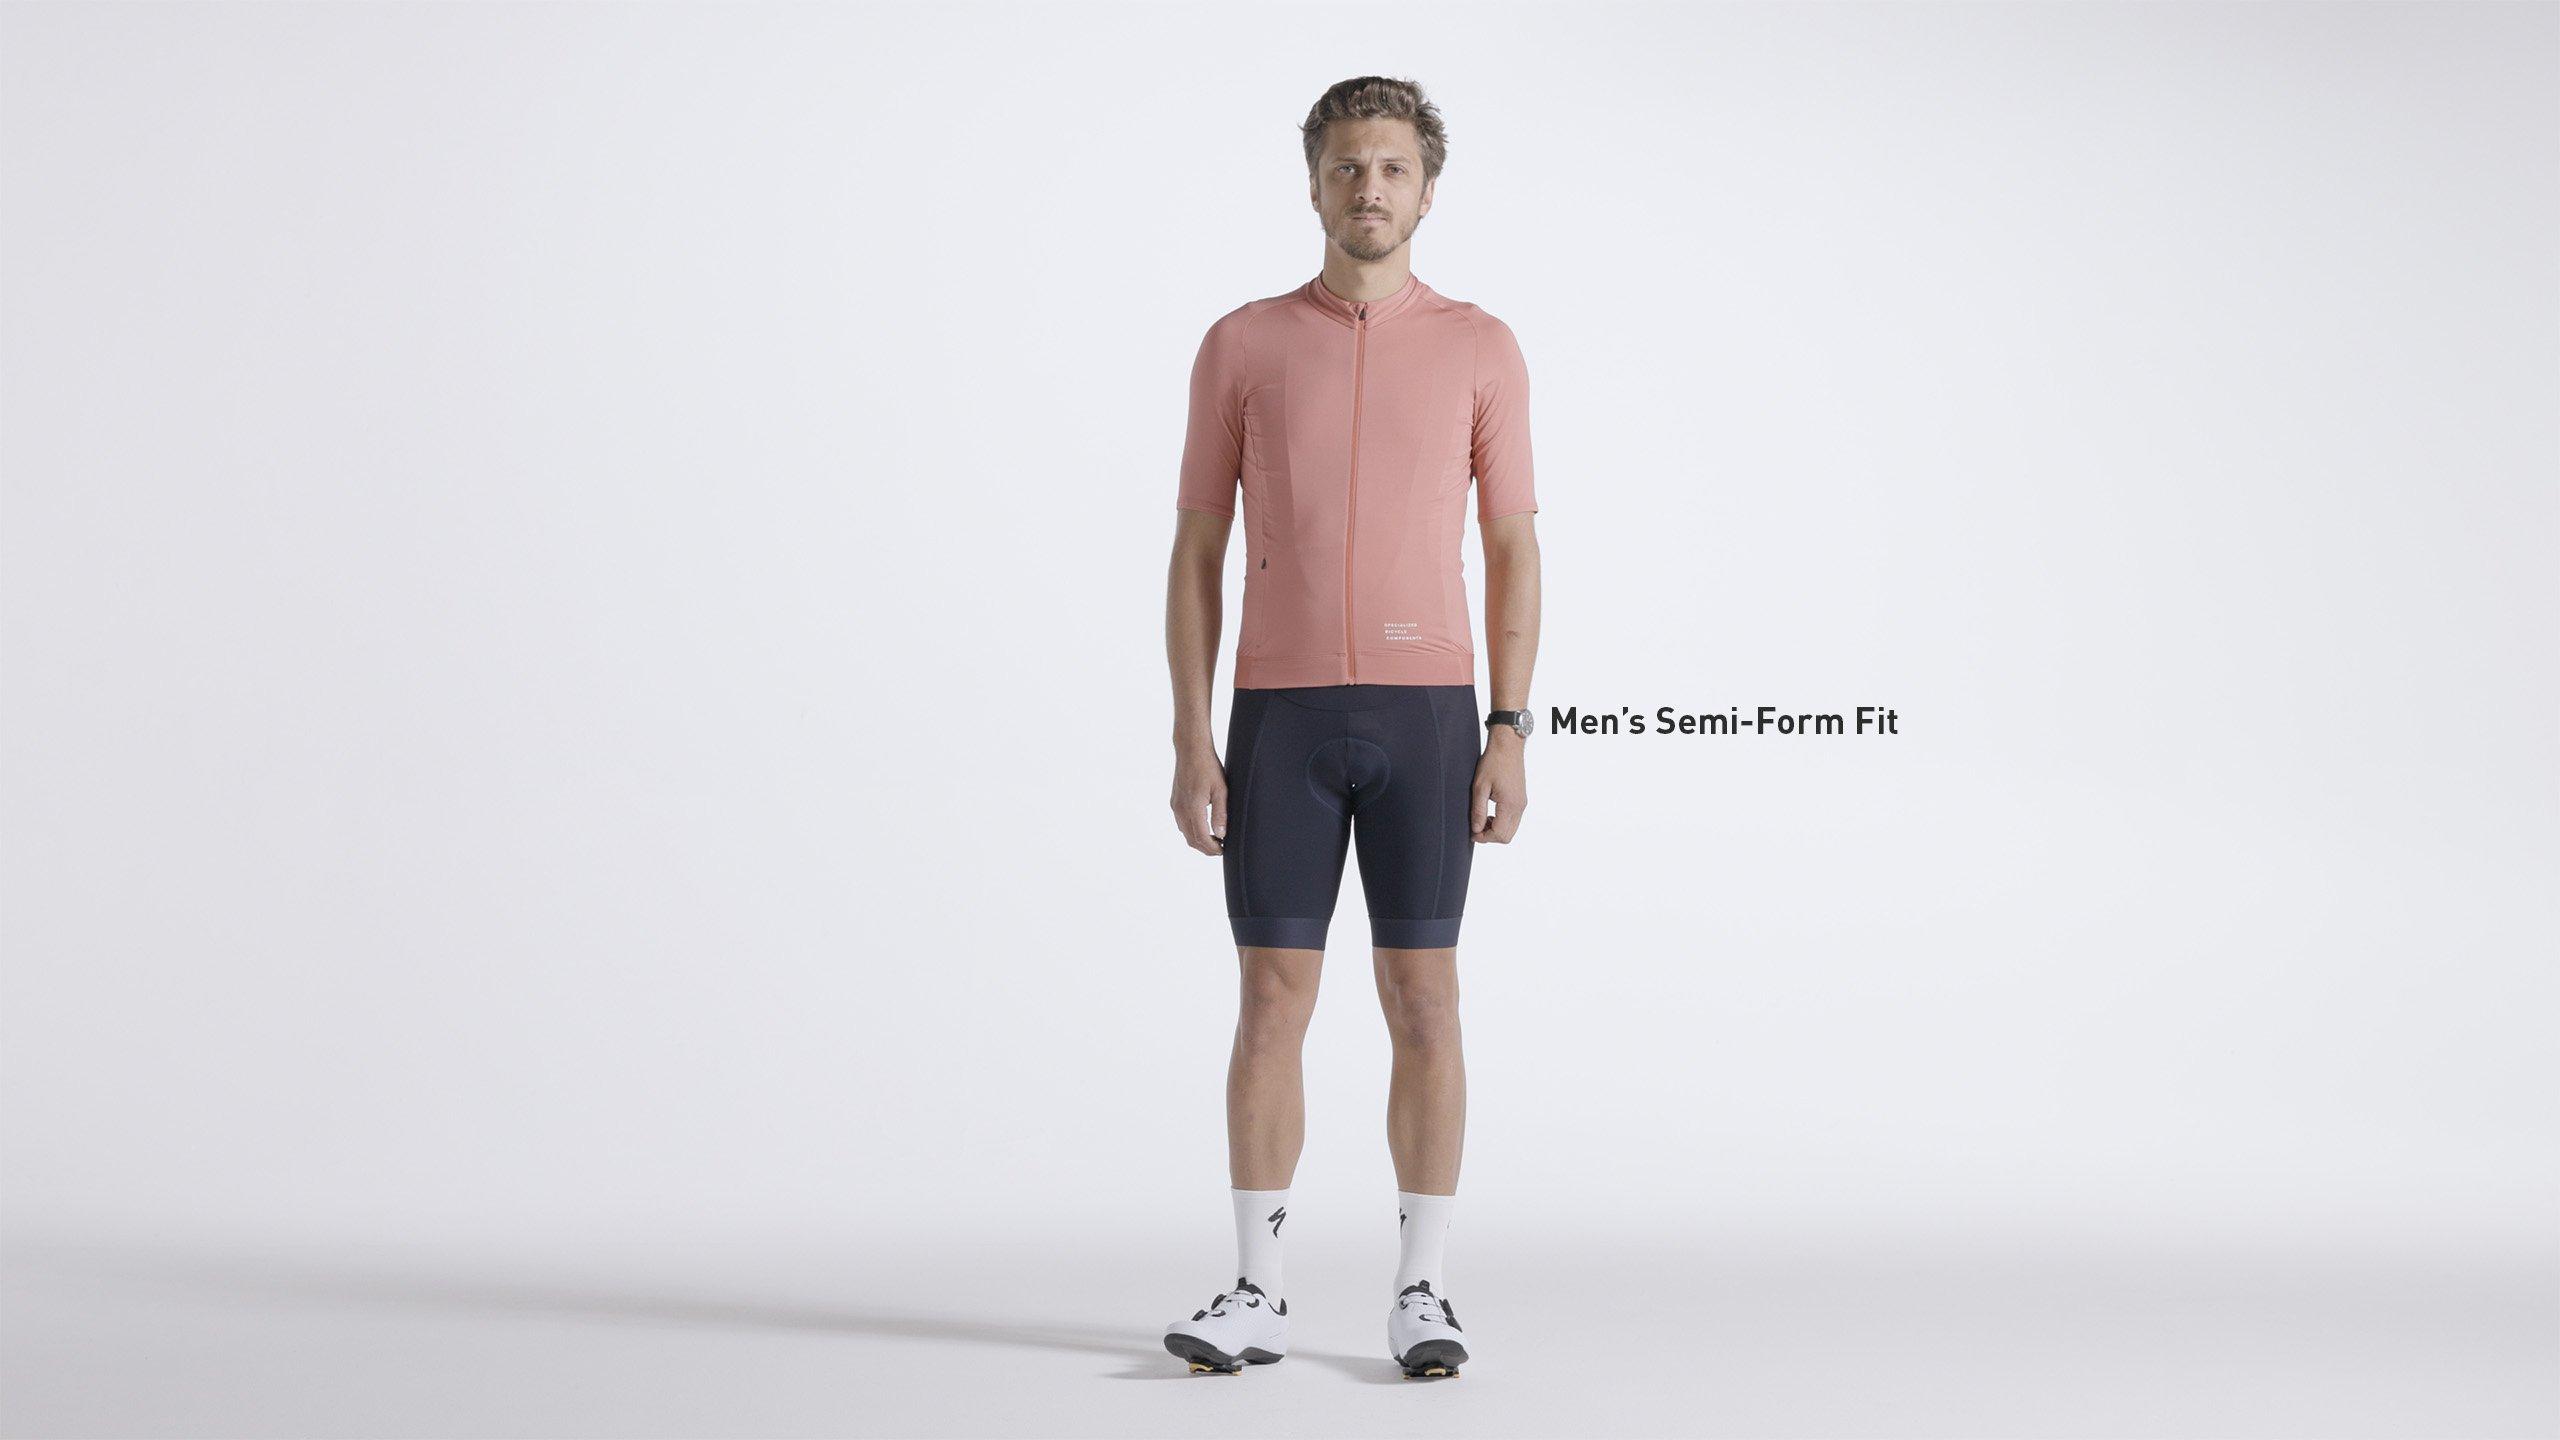 https://assets.specialized.com/i/specialized/Mens-Semi-Form-Fit